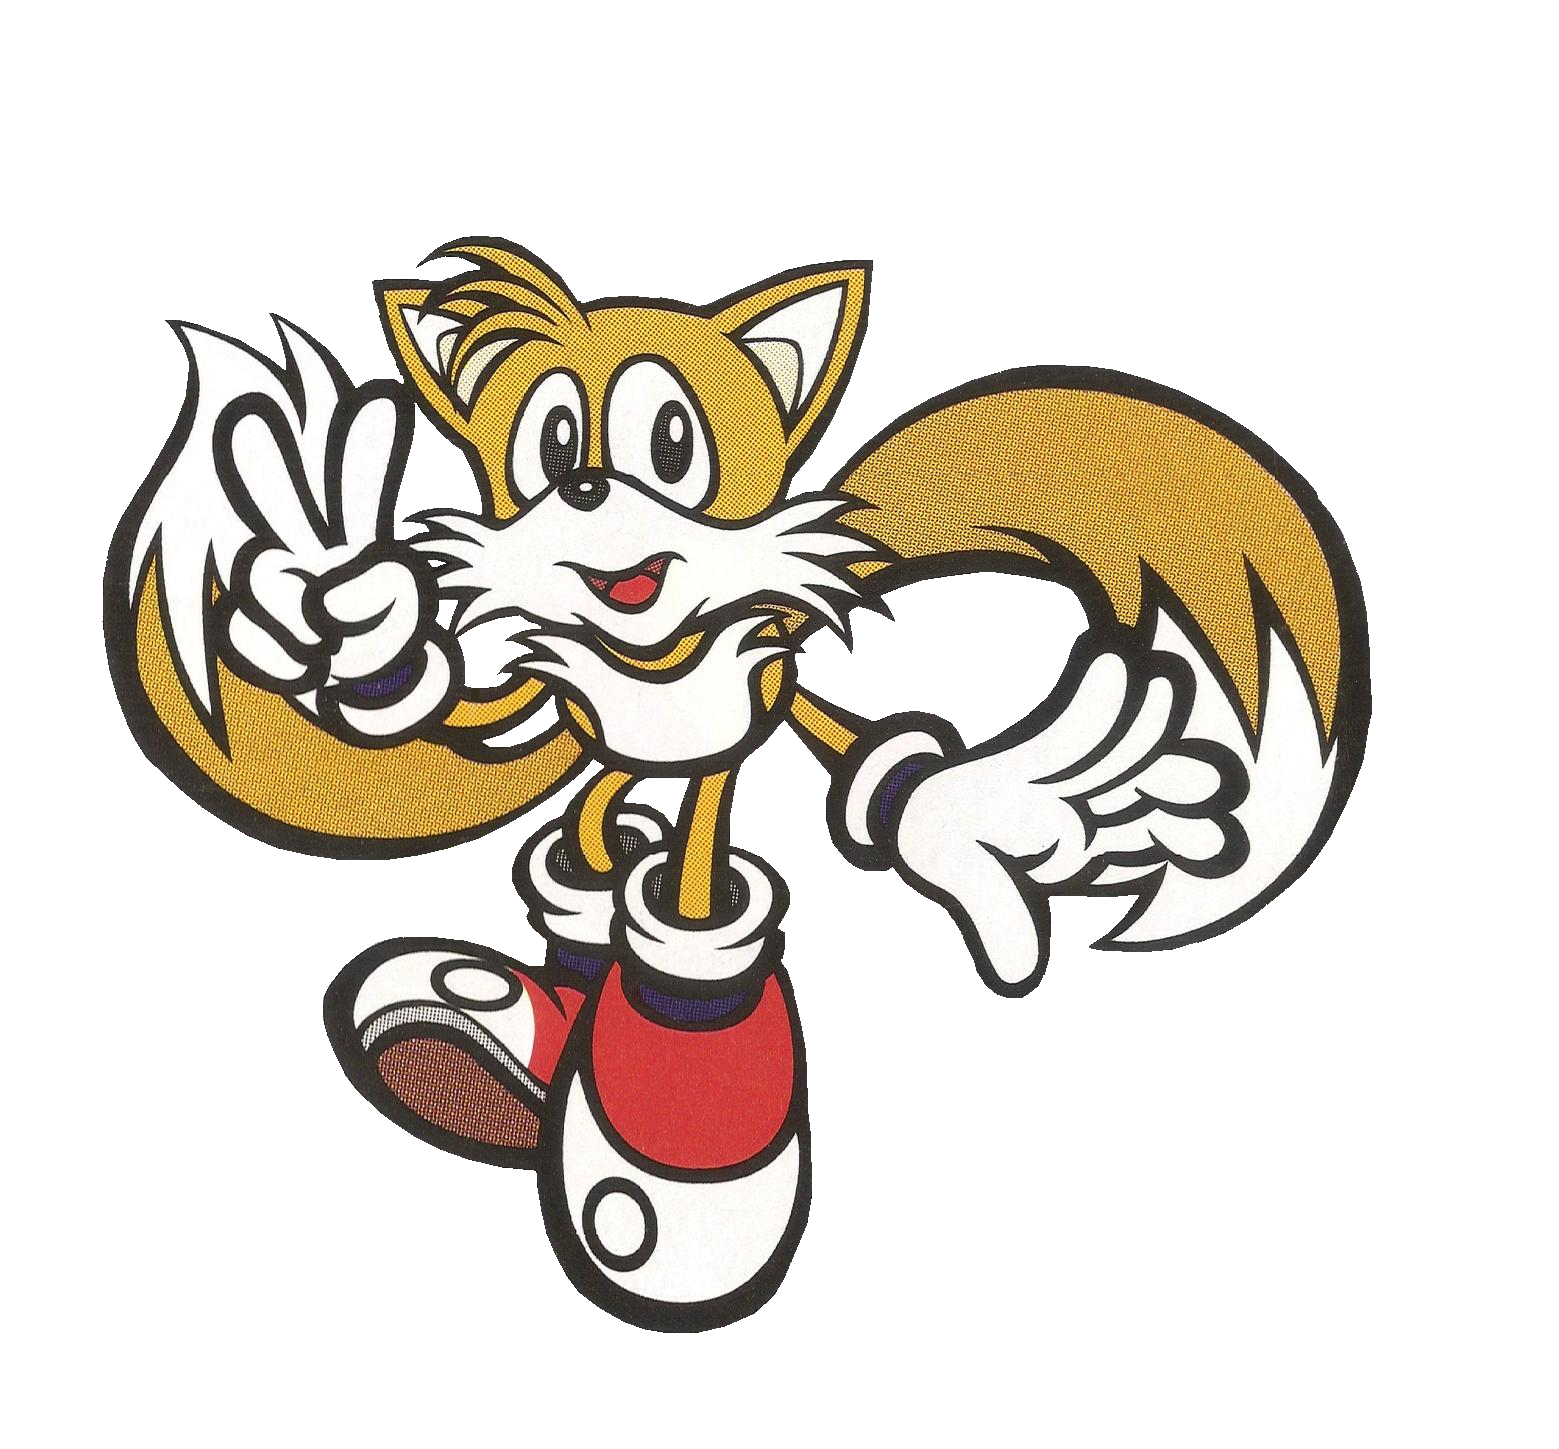 Tails from the official artwork set for #SonictheHedgehog 2 on #SegaGenesis  and #Megadrive. #Sonic.